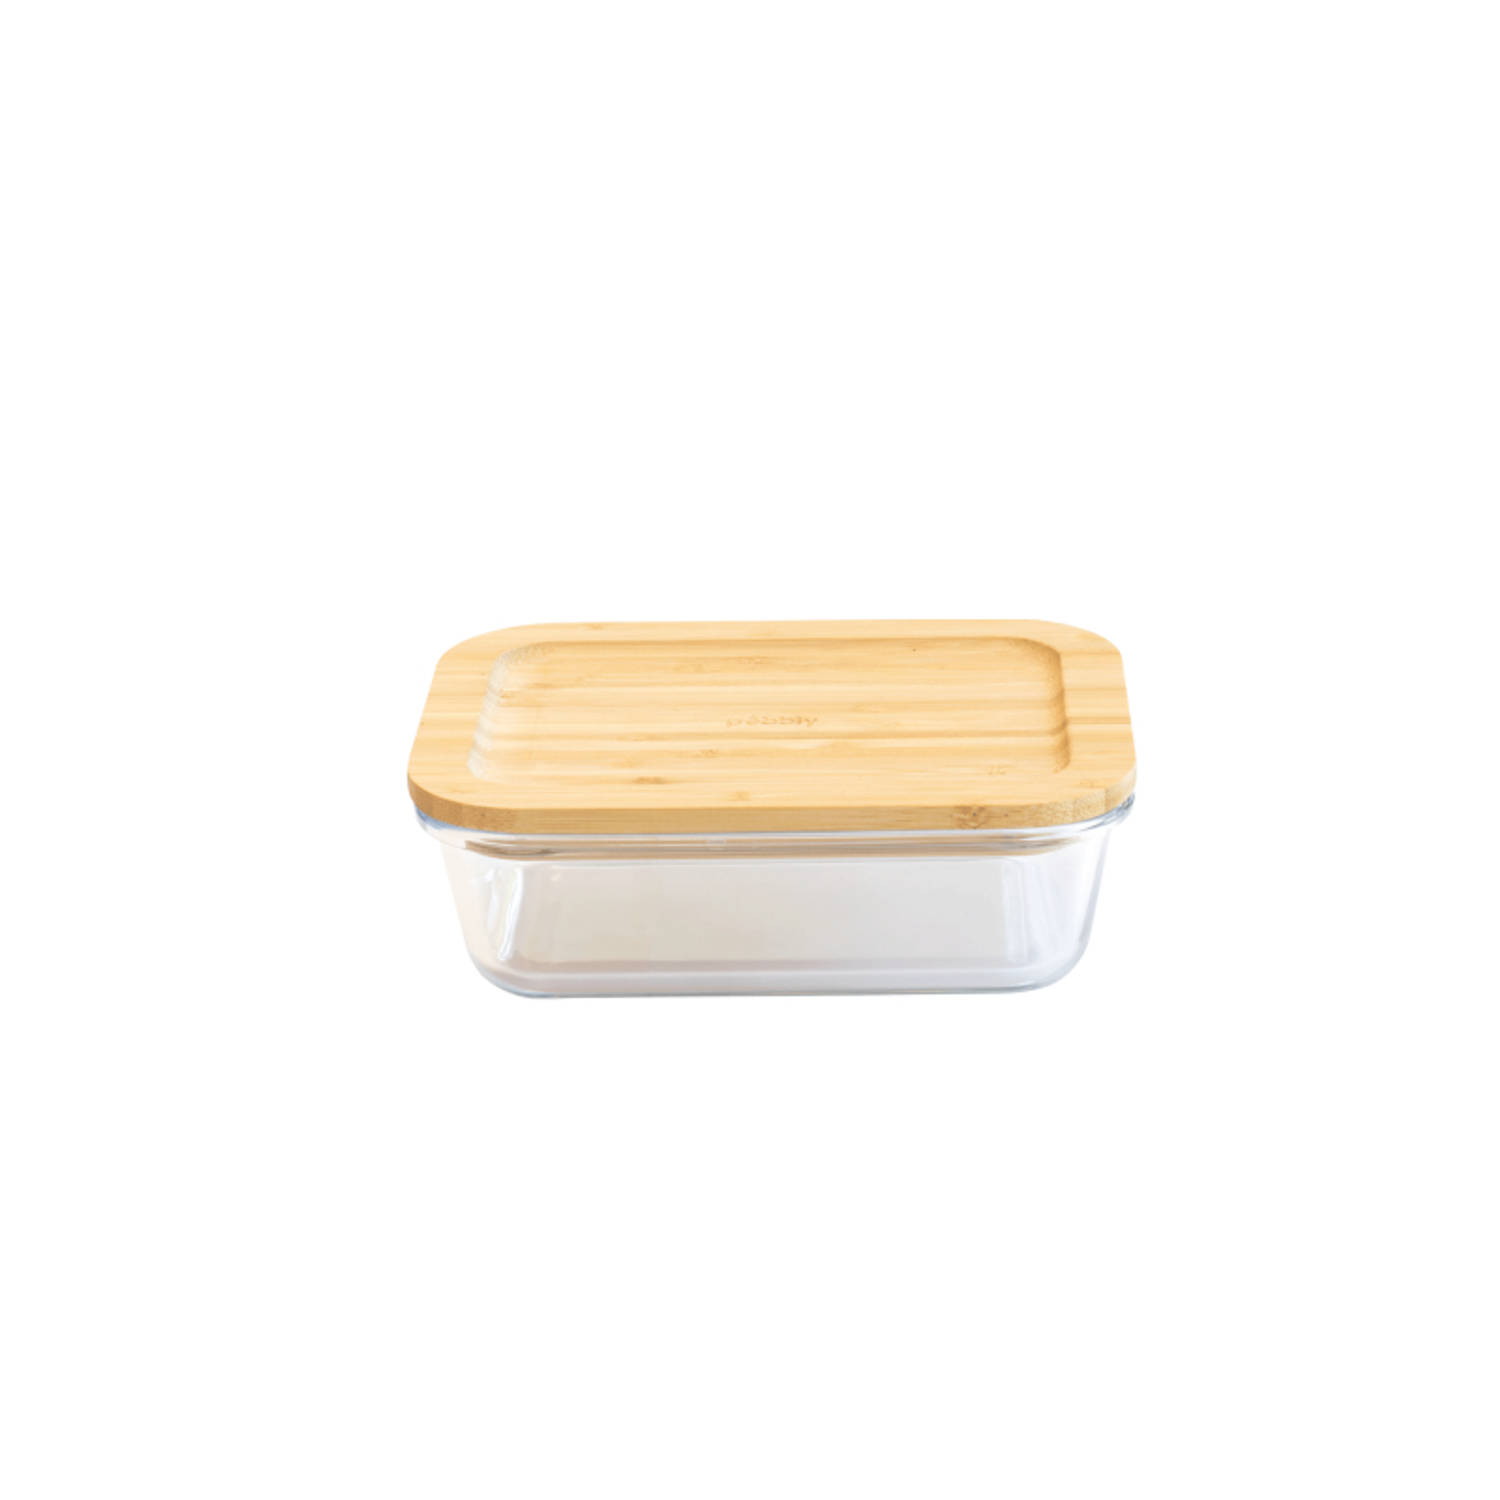 Pebbly Voedselcontainer 14,8 X 10,2 Cm Glas Transparant 640 Ml